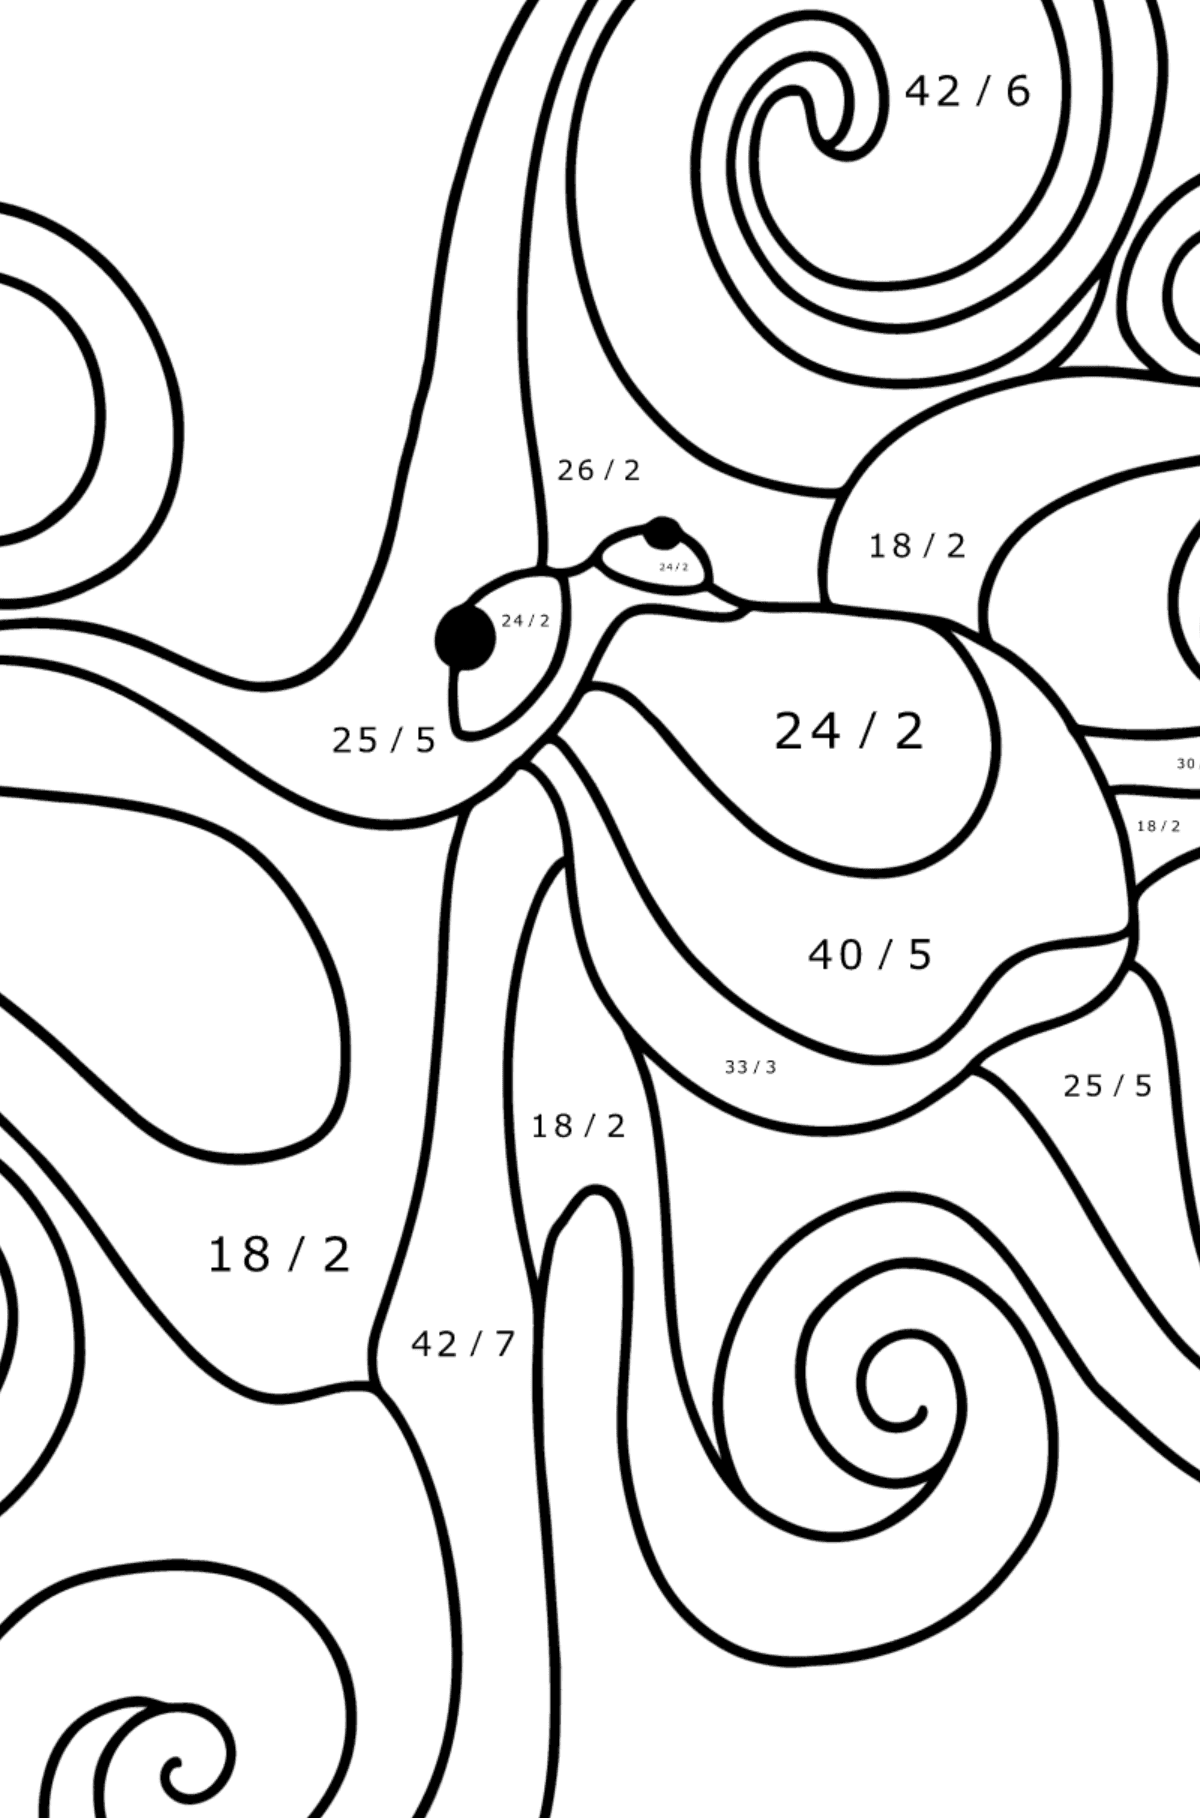 Common octopus coloring page - Math Coloring - Division for Kids